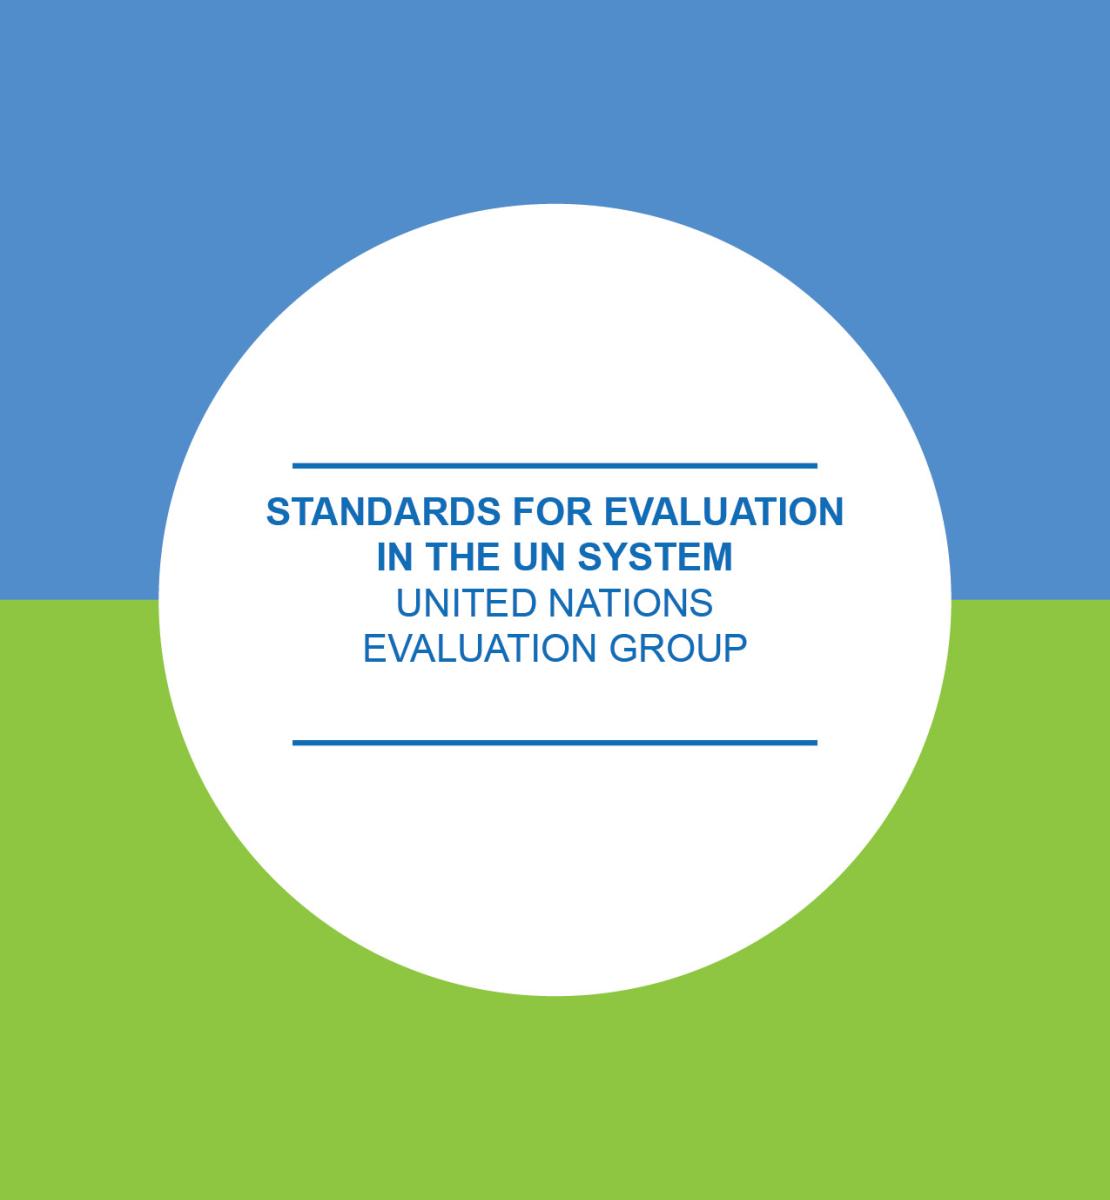 Standards for Evaluation in the UN System